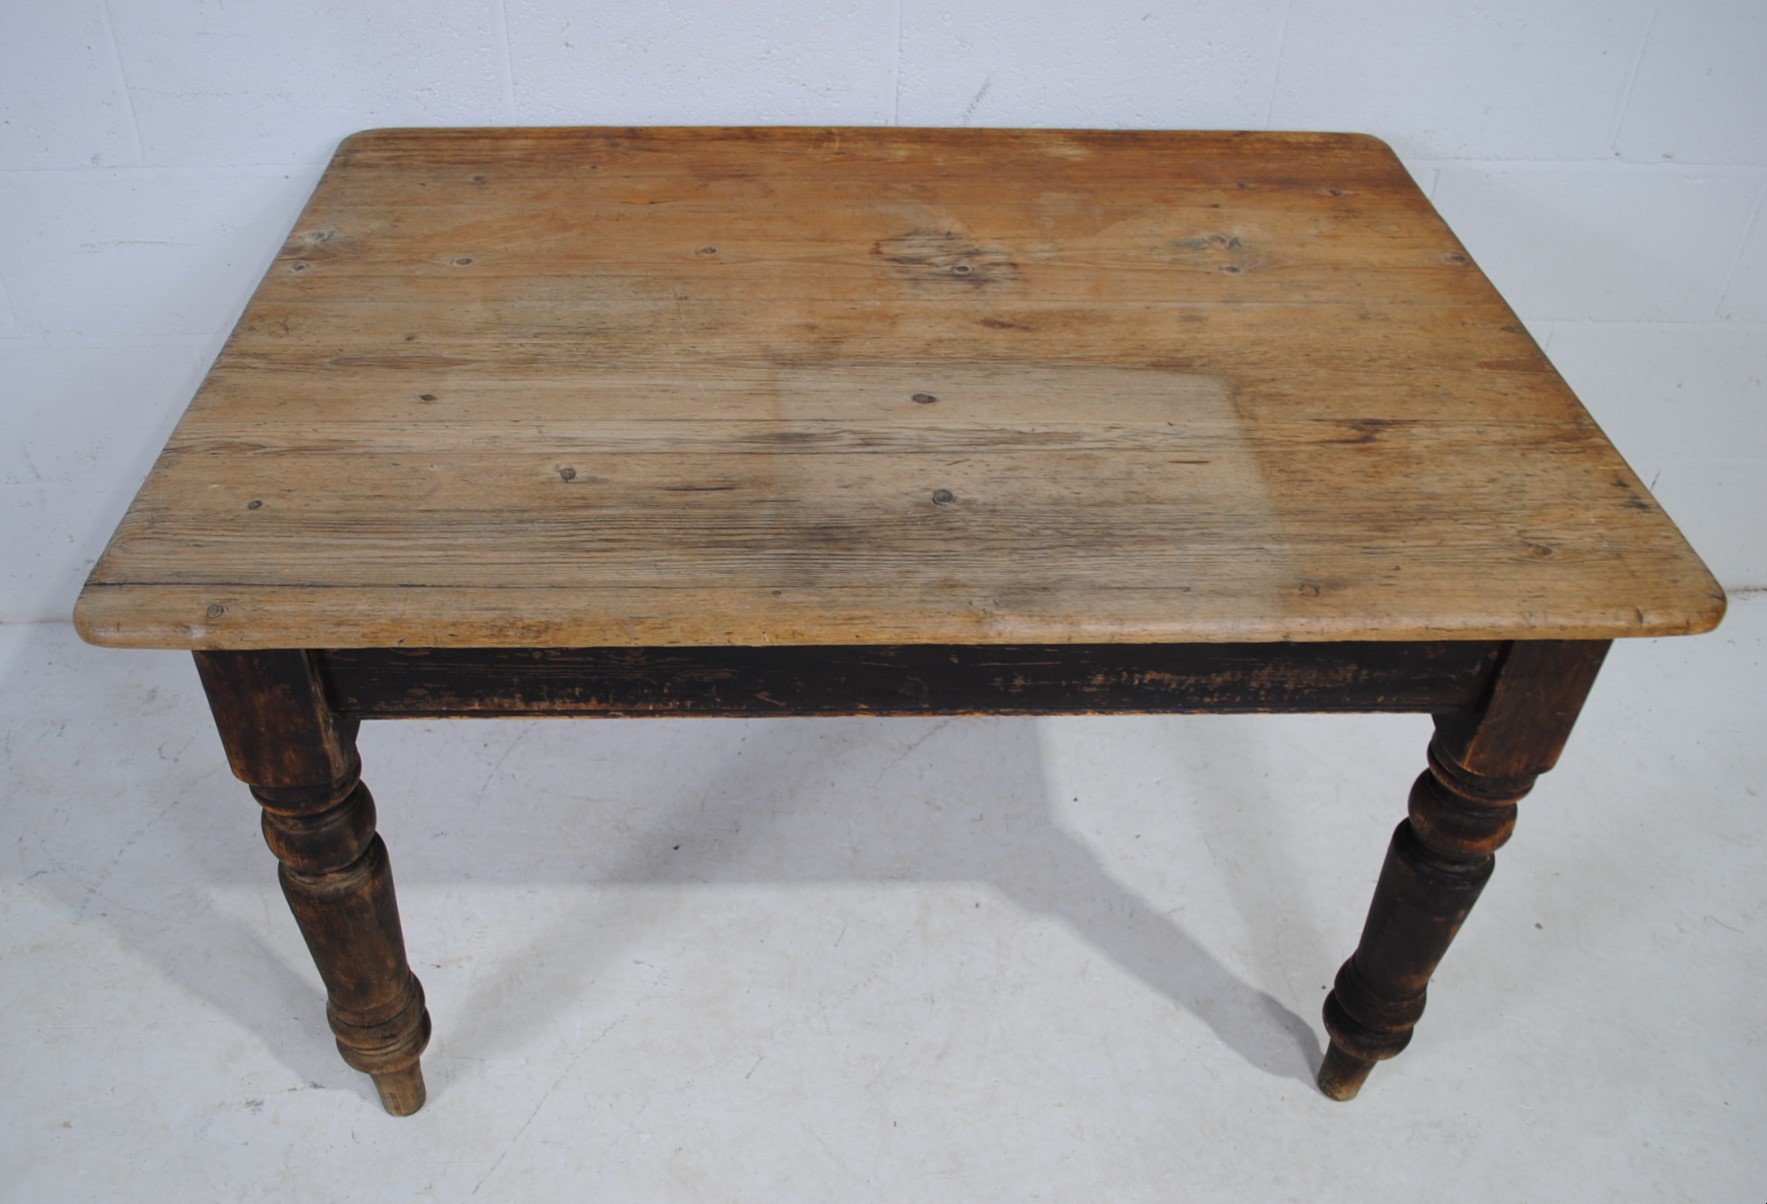 An antique pine farmhouse table, with single drawer, raised on turned legs - length 91cm, depth - Image 5 of 6